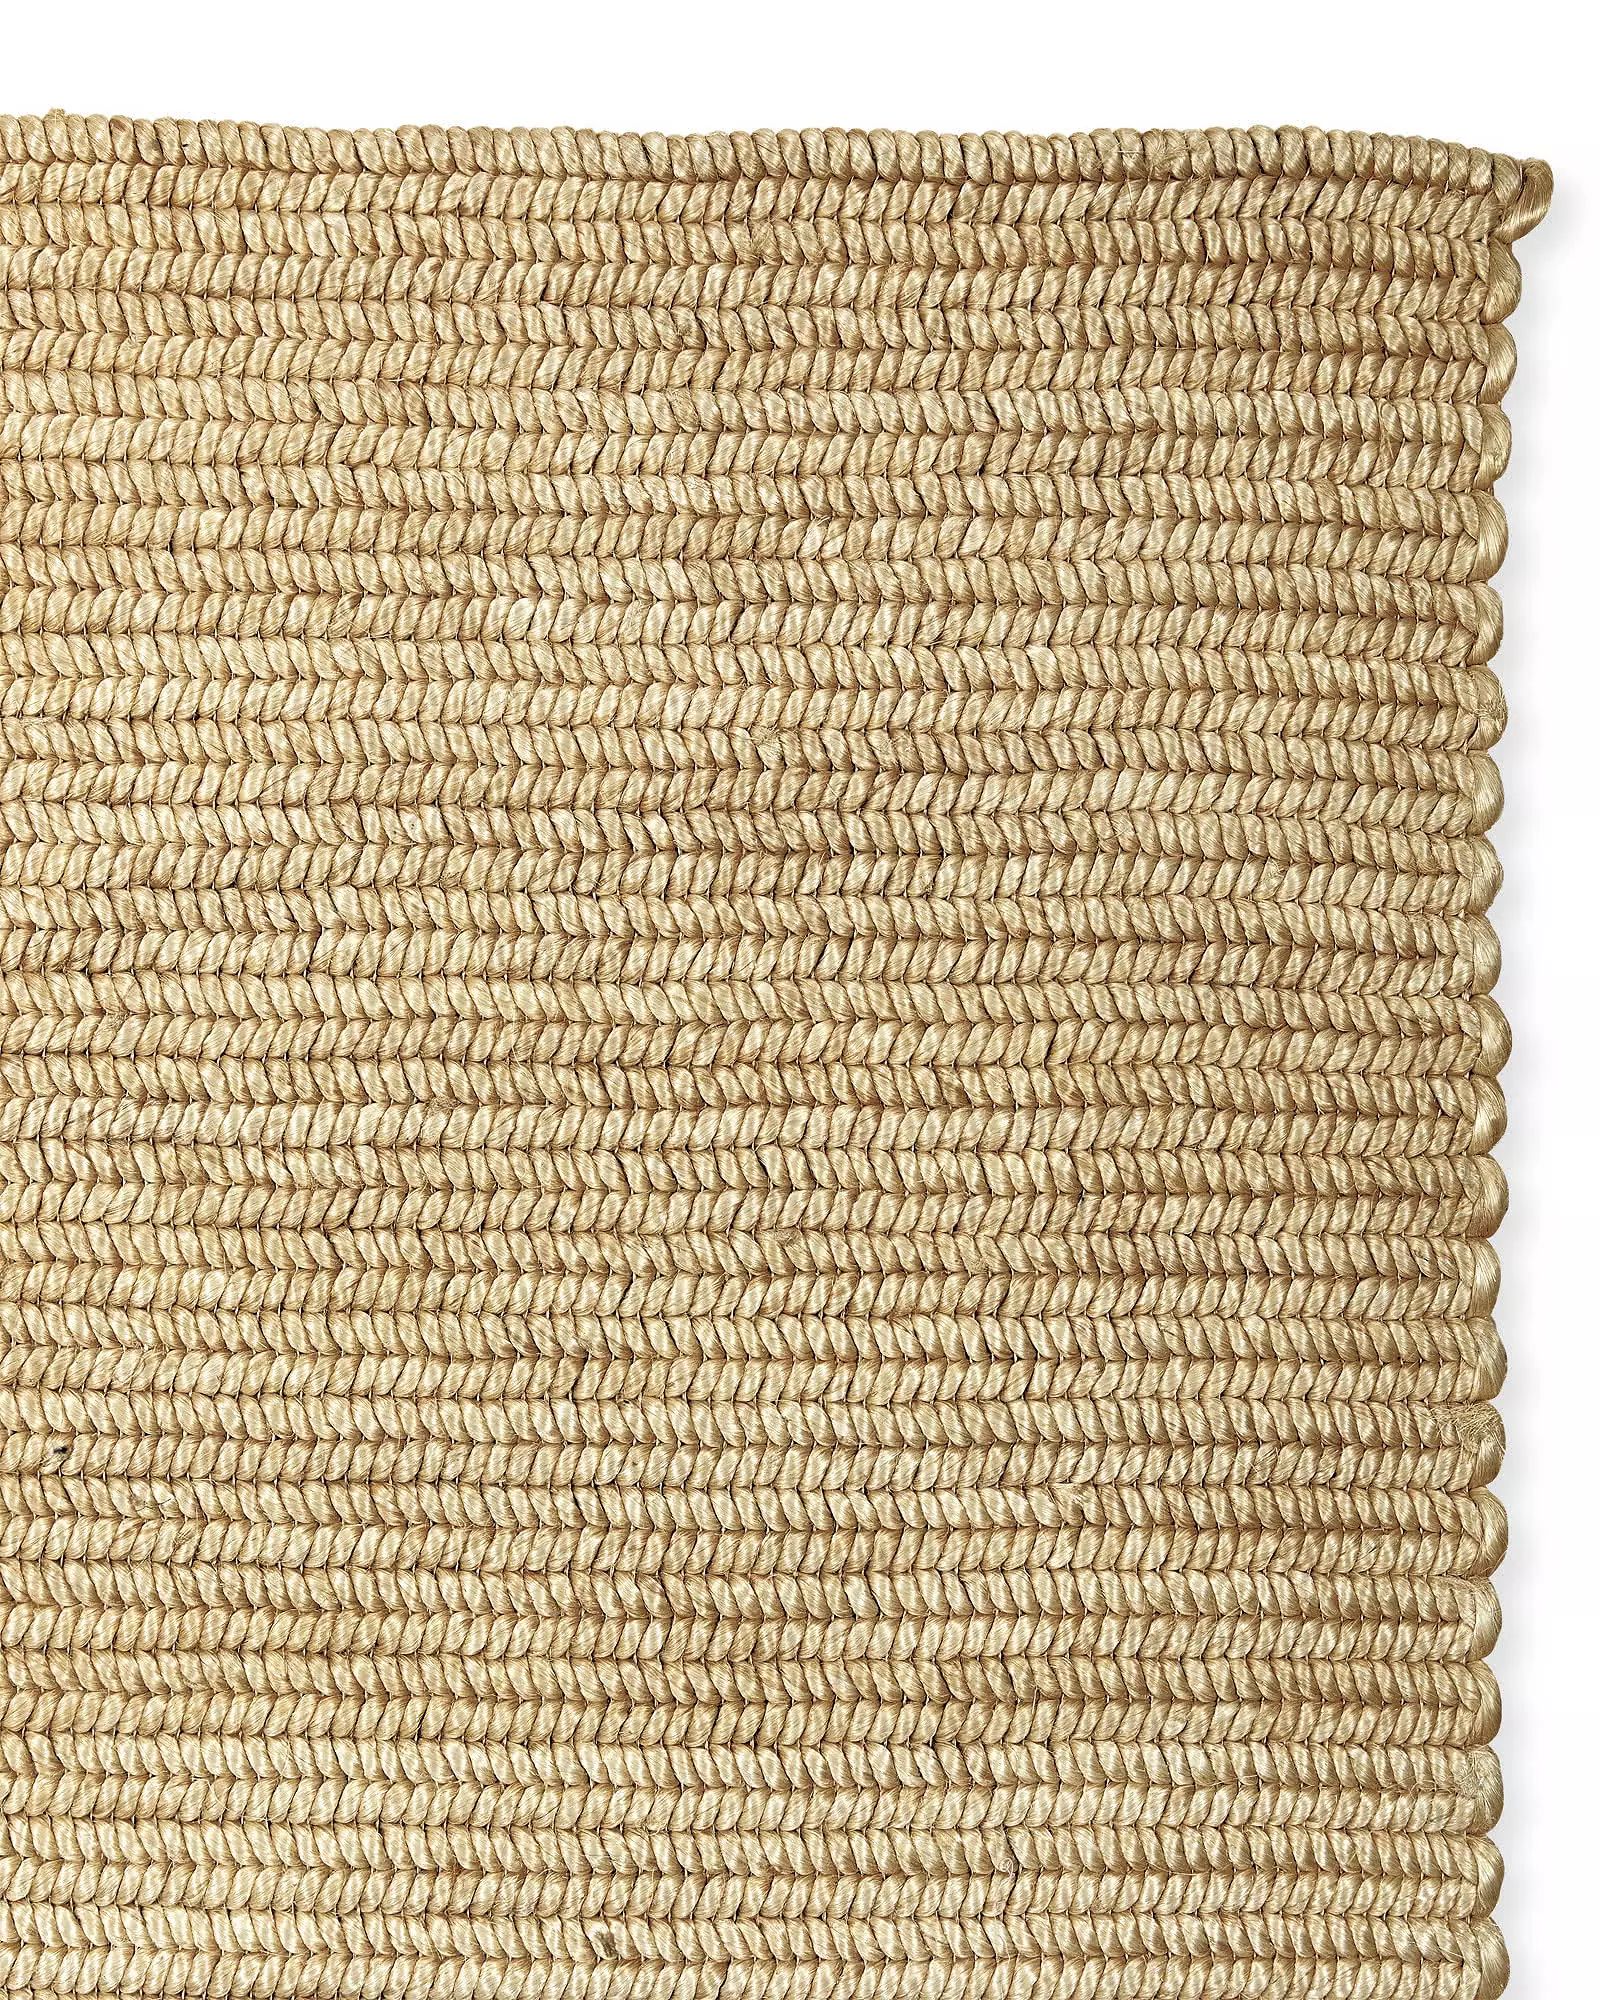 Braided Abaca Rug | Serena and Lily